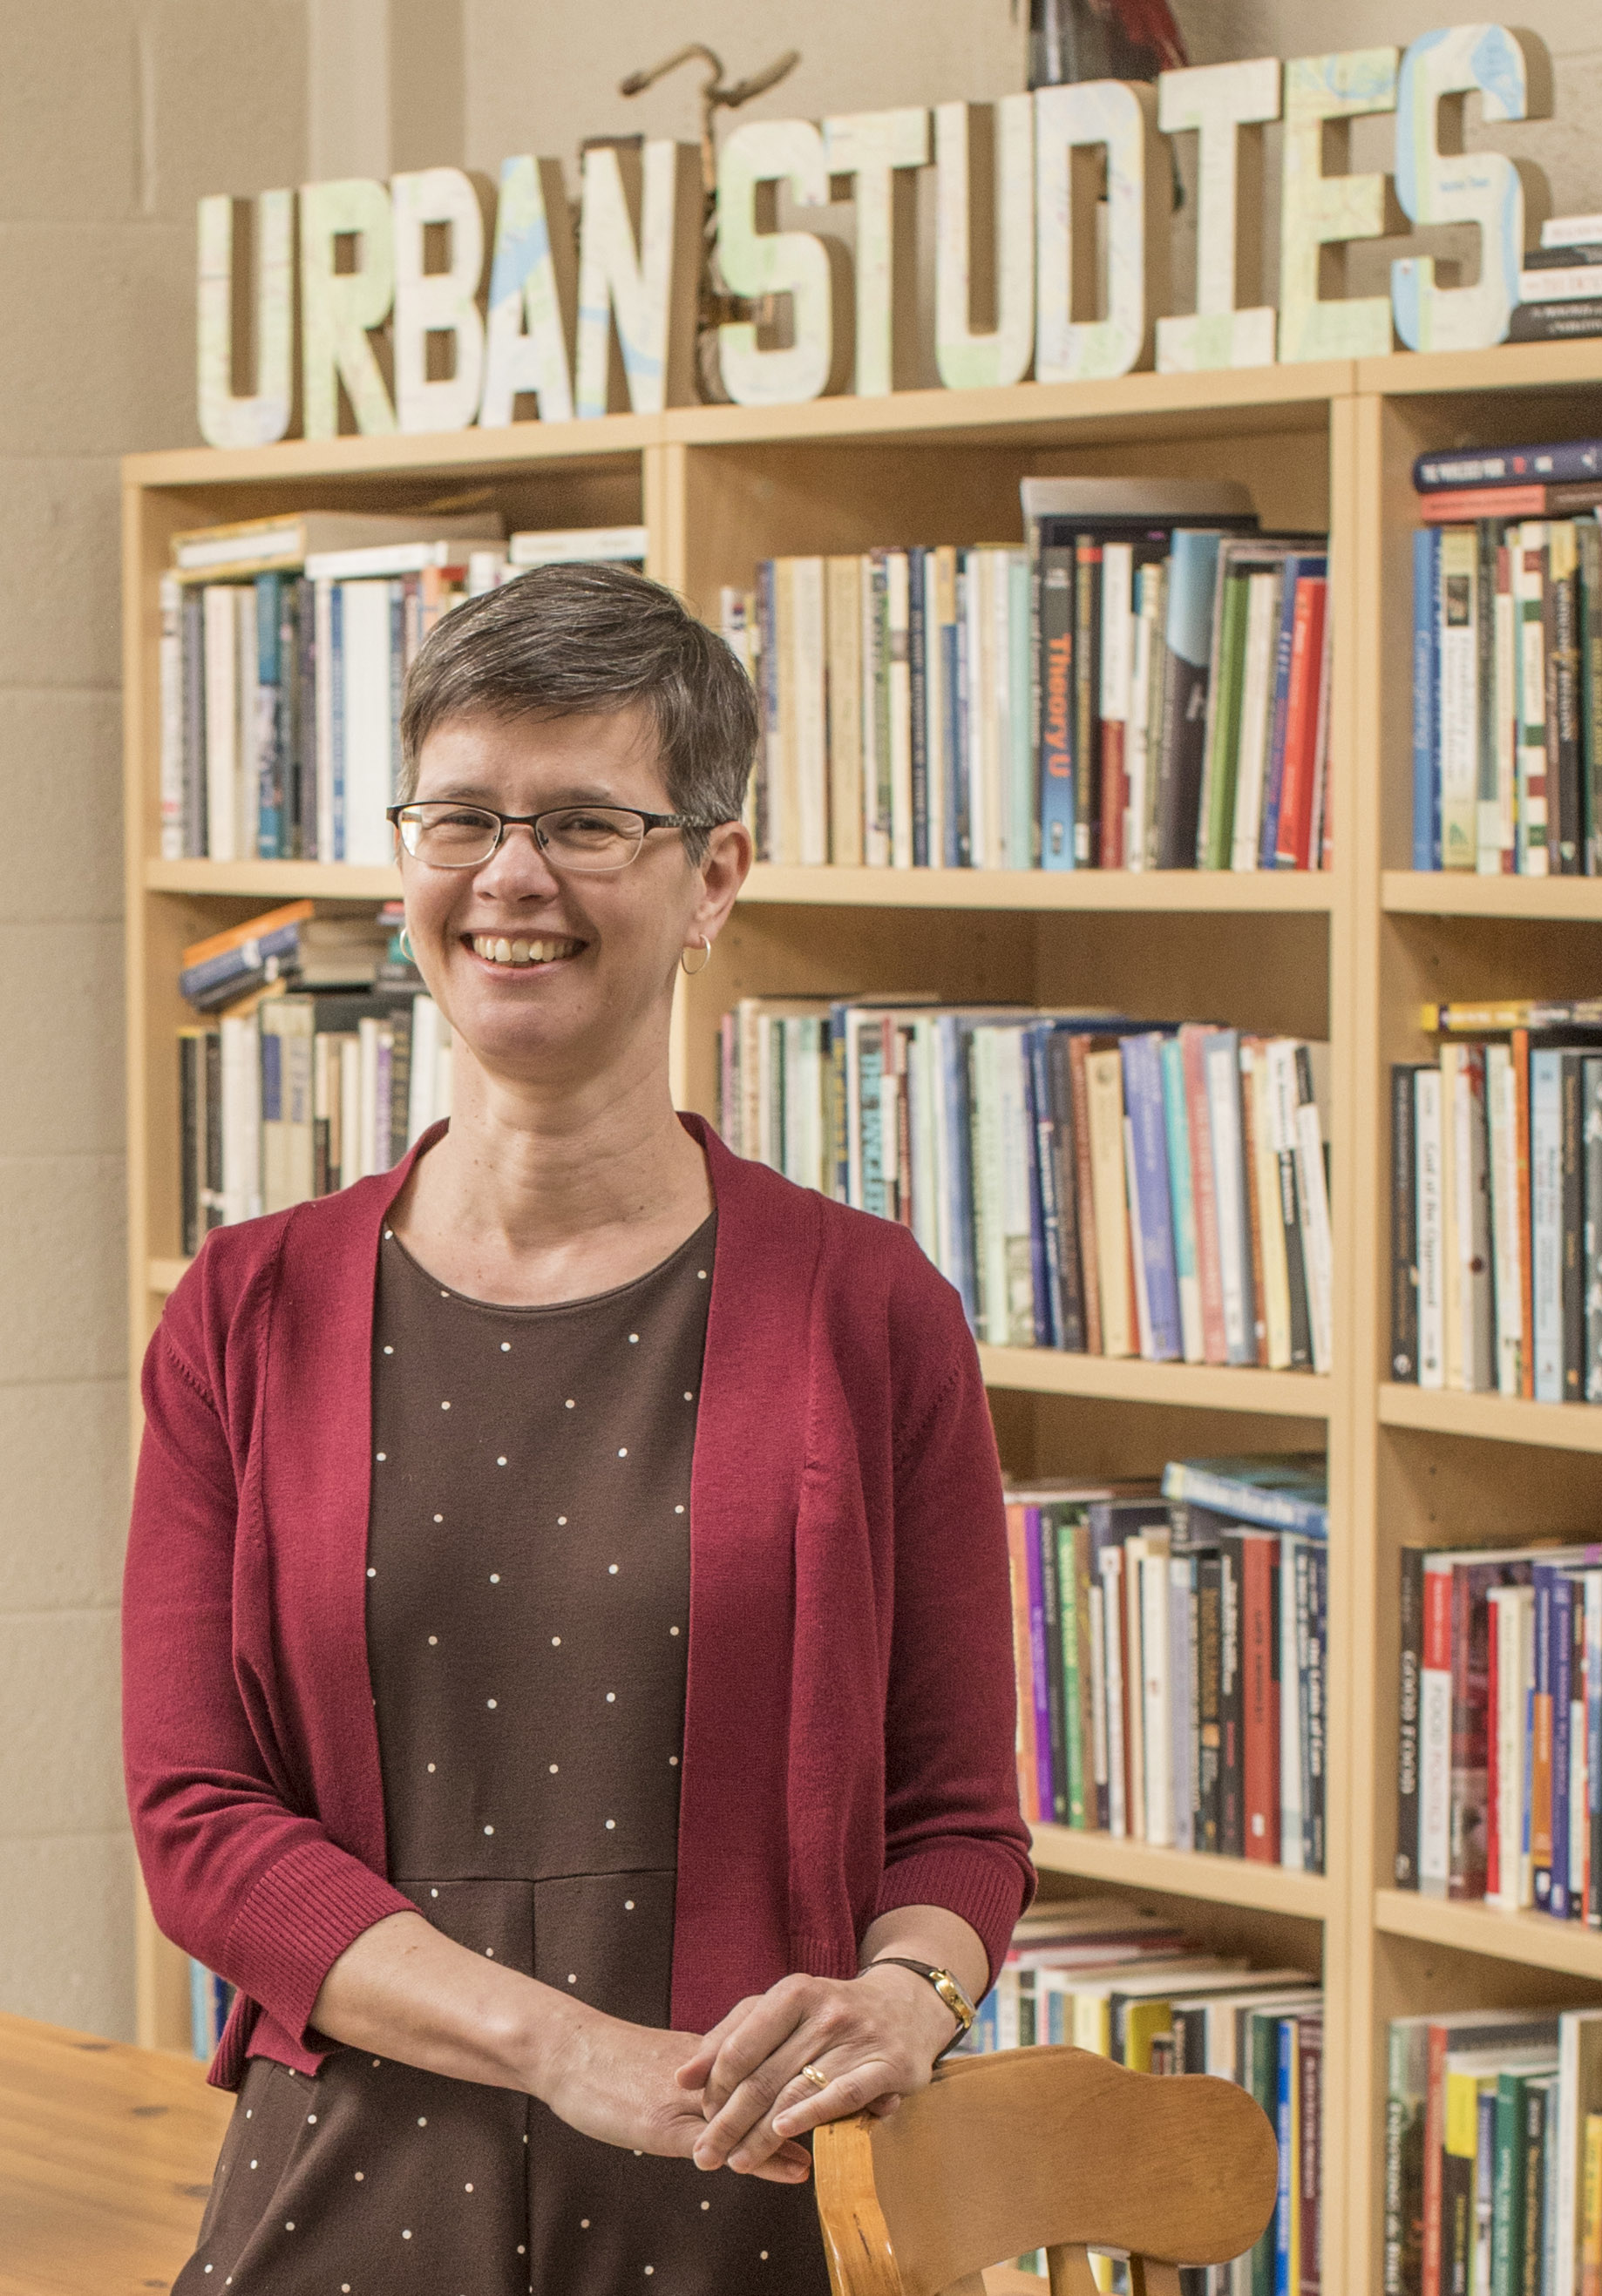 a woman with short hair stands in front of a bookcase with the words Urban Studies on top